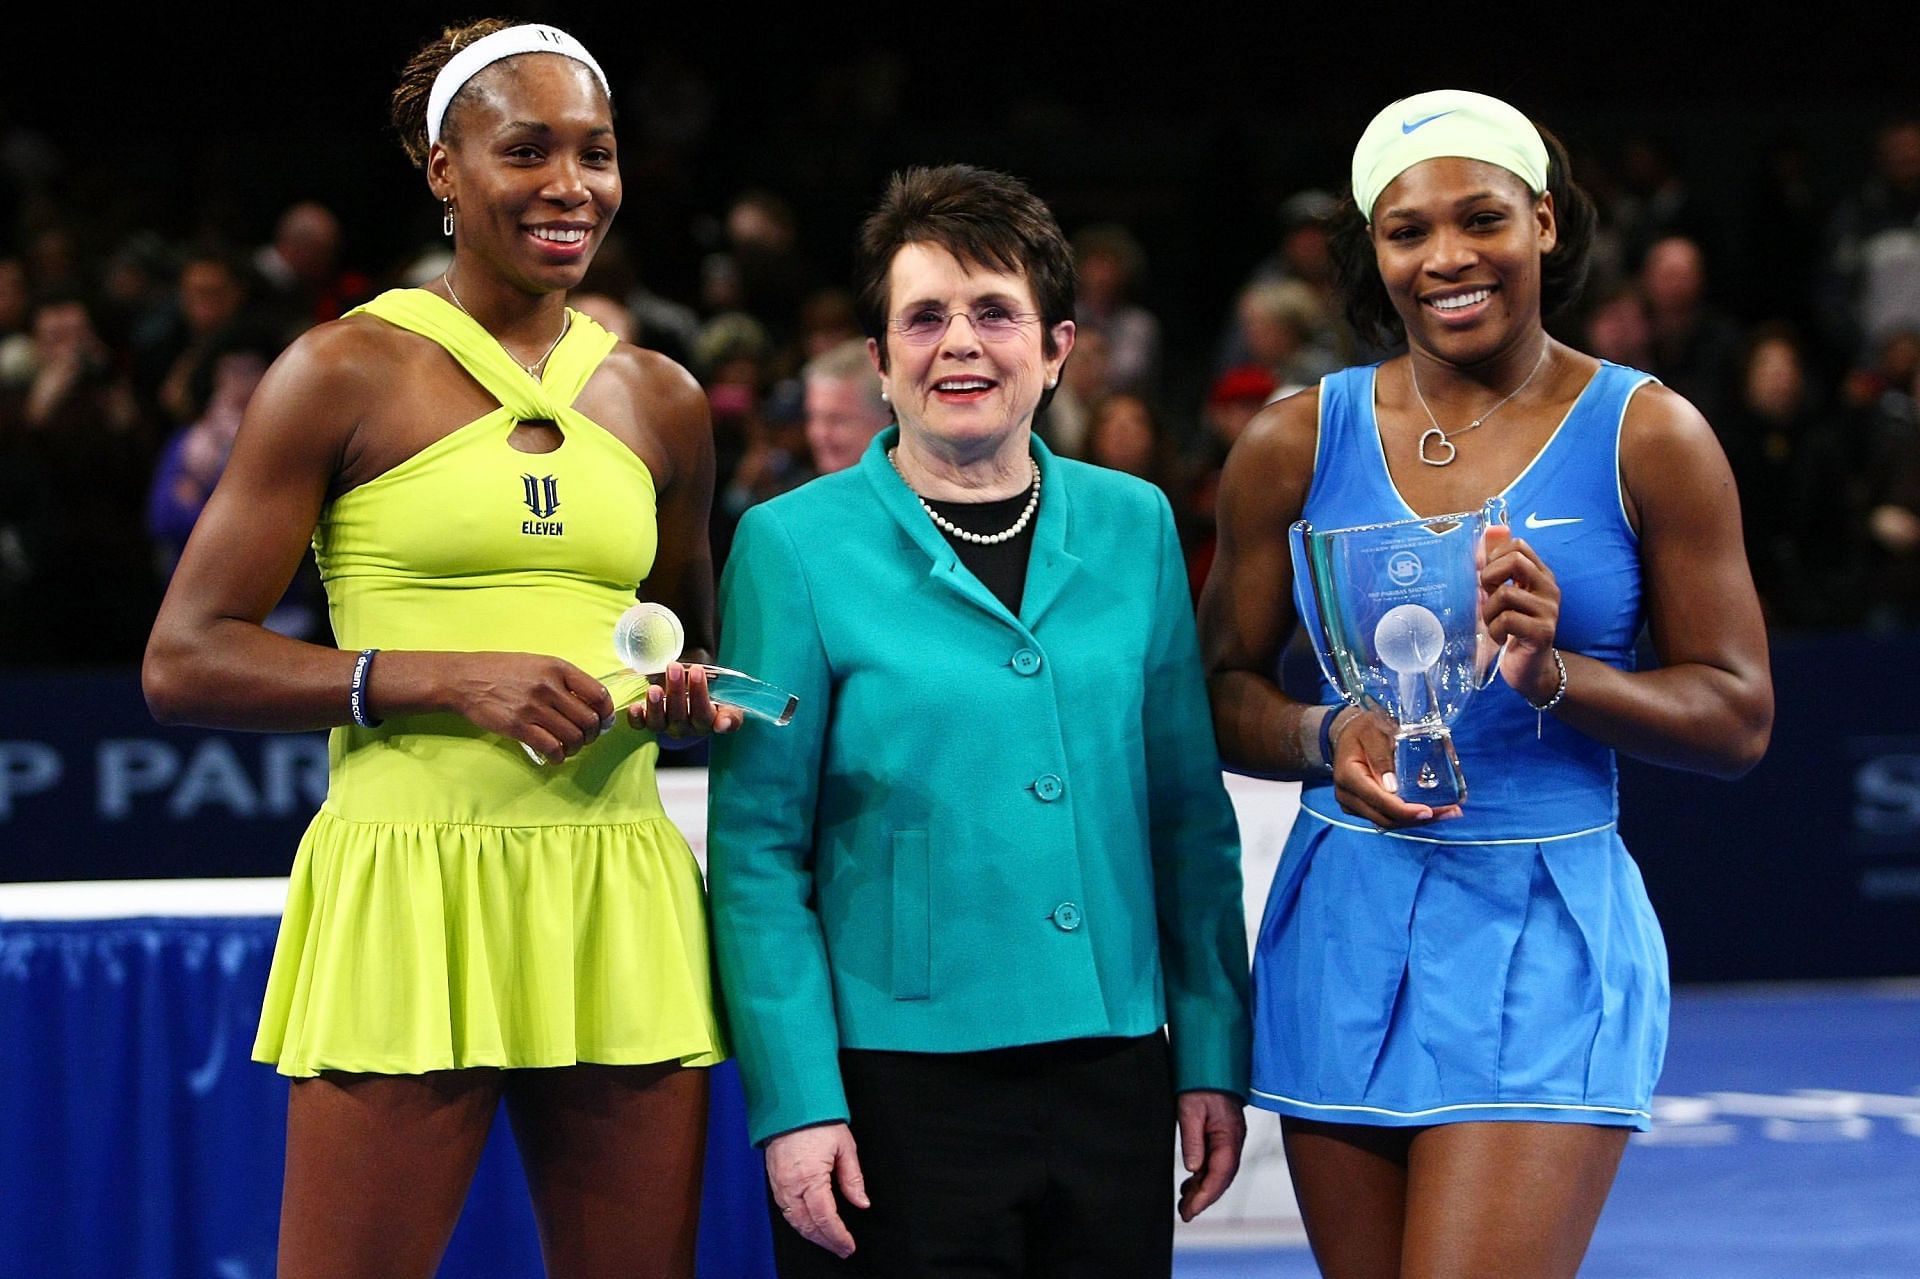 Venus Williams with Billie Jean King and sister Serena Williams during the BNP Paribas Showdown for the Billie Jean Cup in 2009